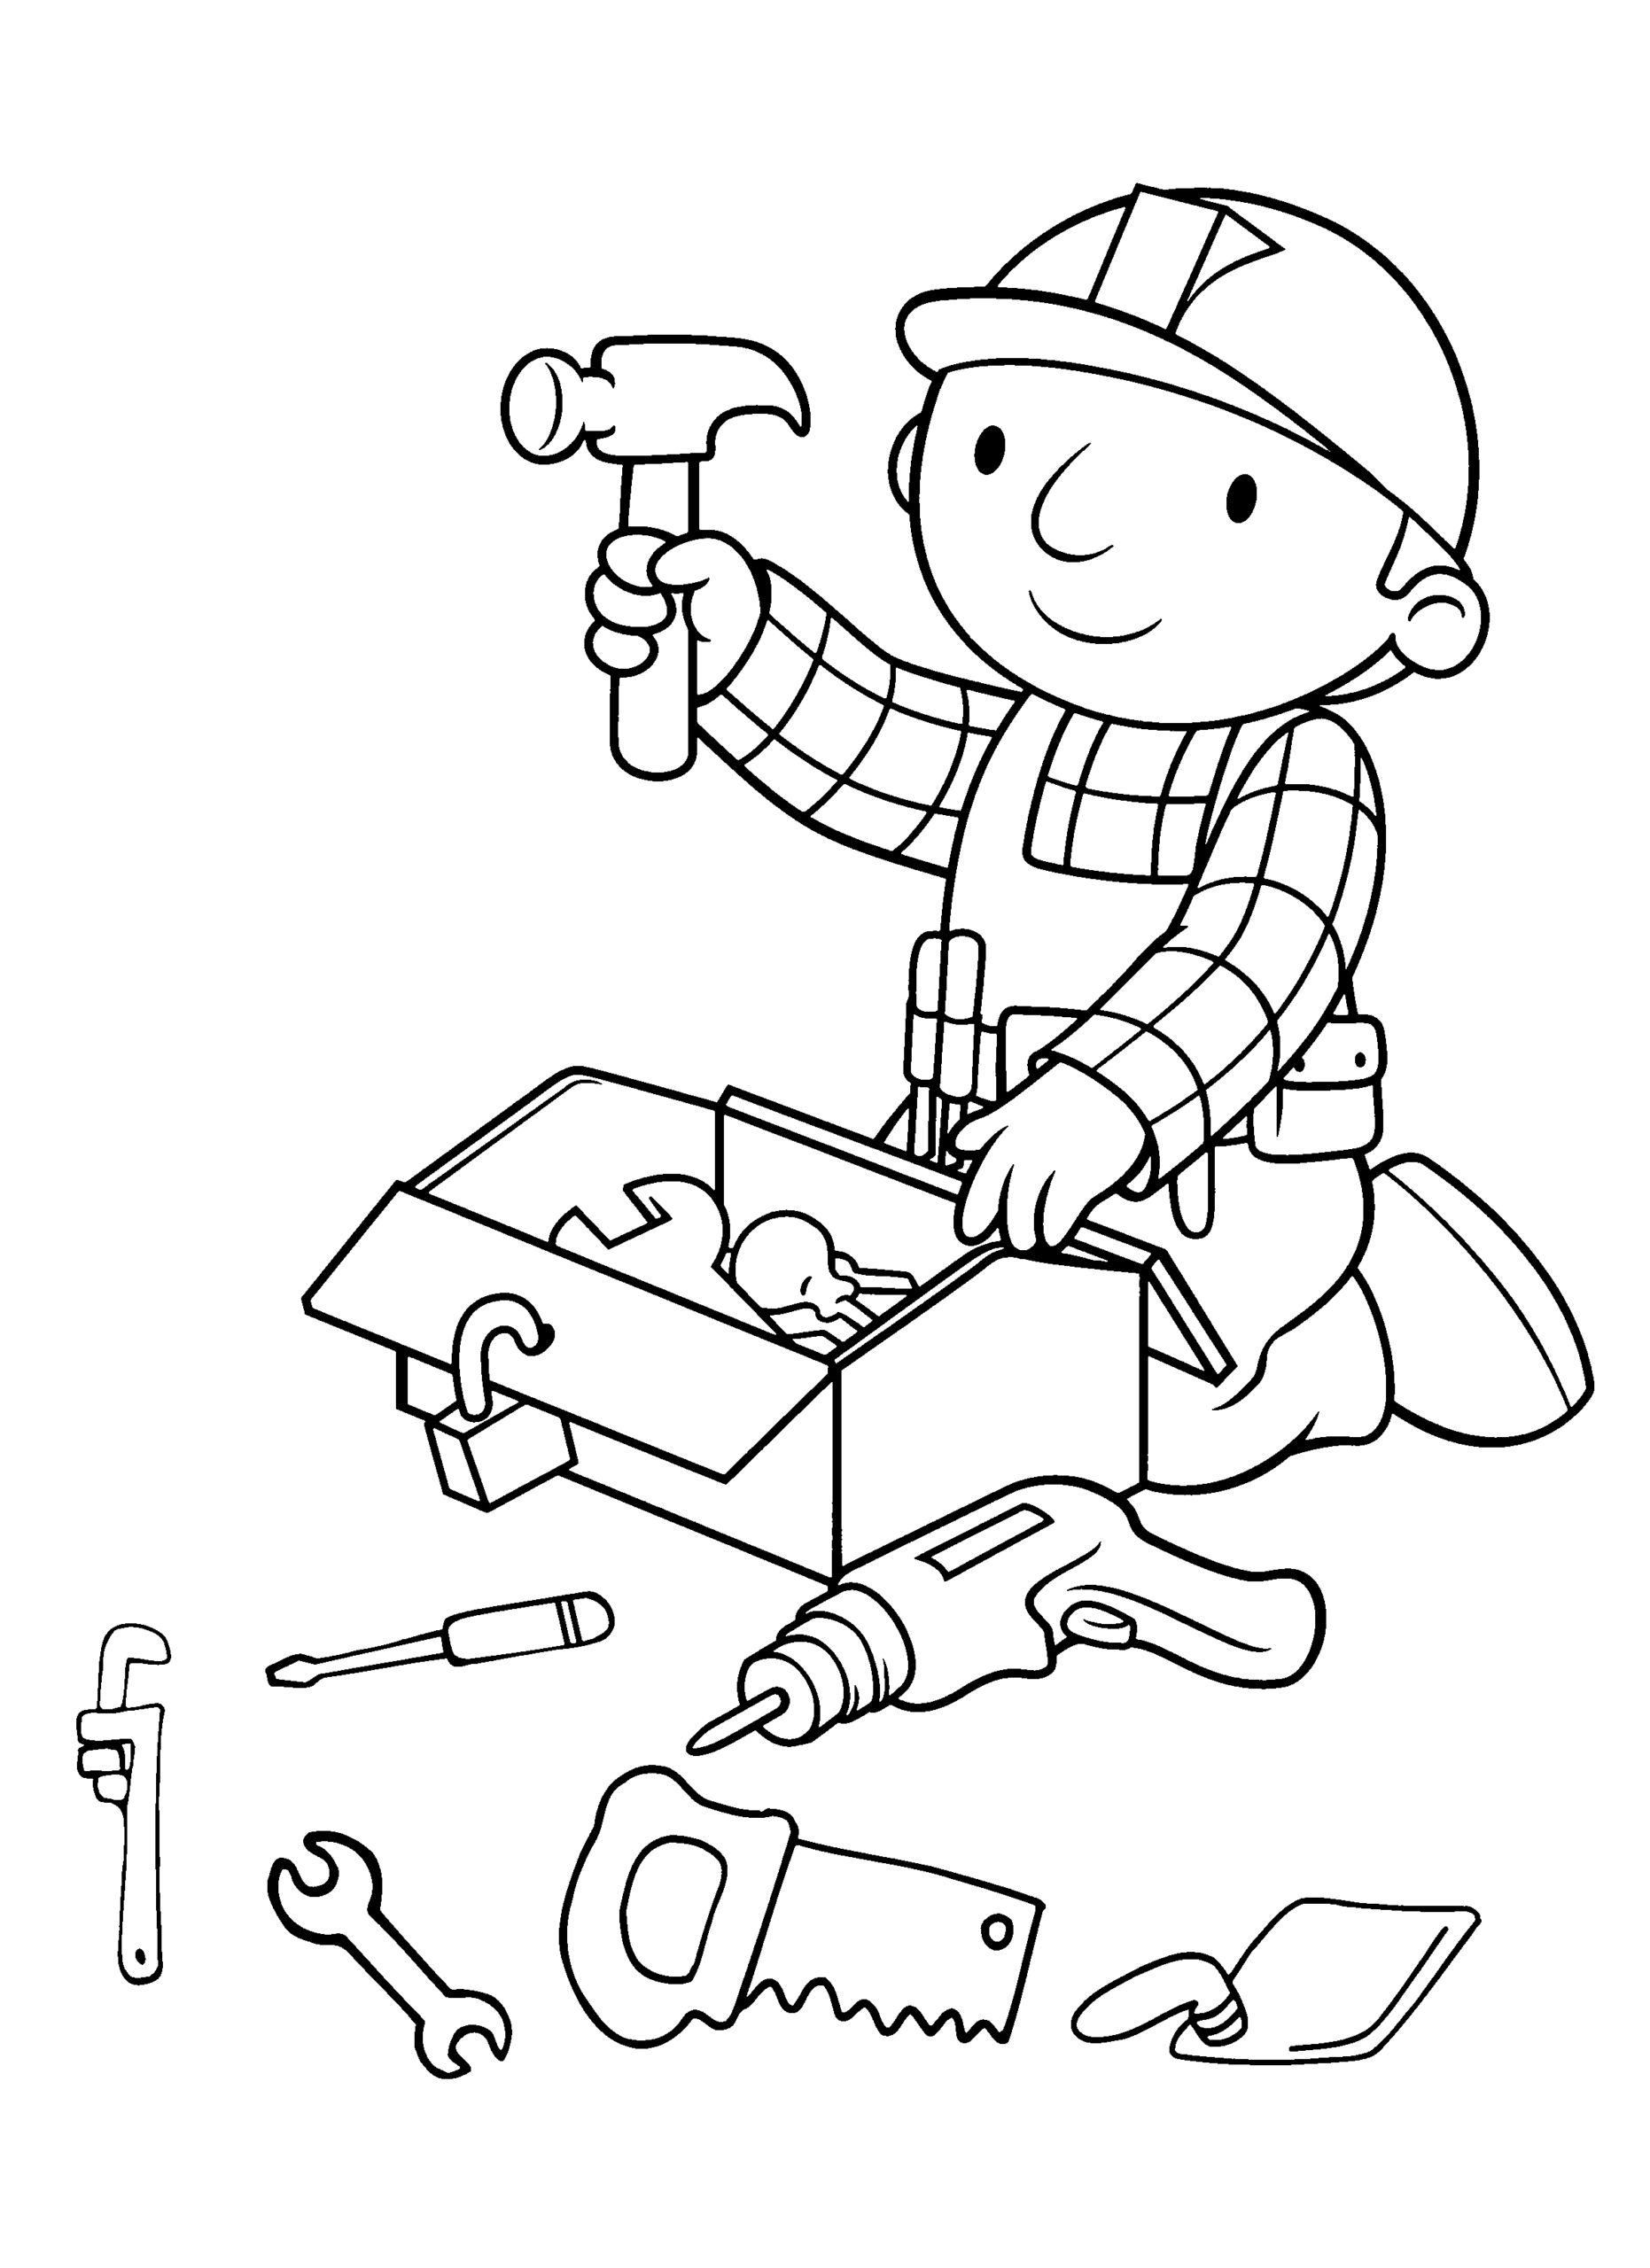 Bob the Builder Coloring Pages TV Film Bob The Builder Printable 2020 00997 Coloring4free